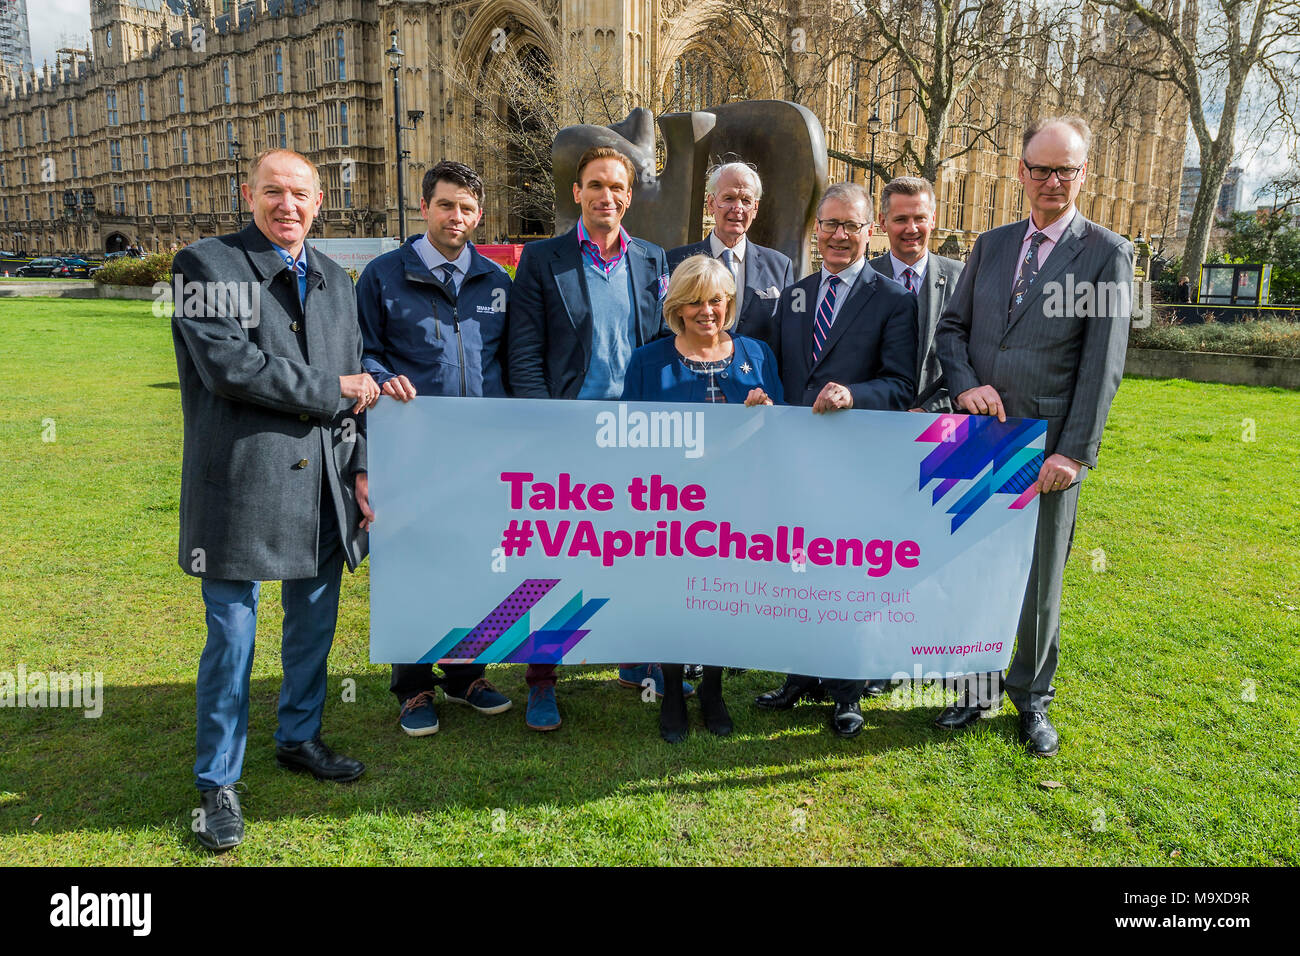 London, UK. 29th Mar, 2018. Sir Kevin Barron MP, Scott Mann MP, Dr Christian Jessen, Mary Glindon MP, Lord Cathcart, Mark Pawsey MP, Robert Sidebottom UKVIA and Lord Ridley - The All Party Parliamentary Group for E-Cigarettes launch VApril, a nationwide campaign being fronted by TV doctor, Dr Christian Jessen to encourage the UK’s 7m smokers to switch to vaping. Credit: Guy Bell/Alamy Live News Stock Photo